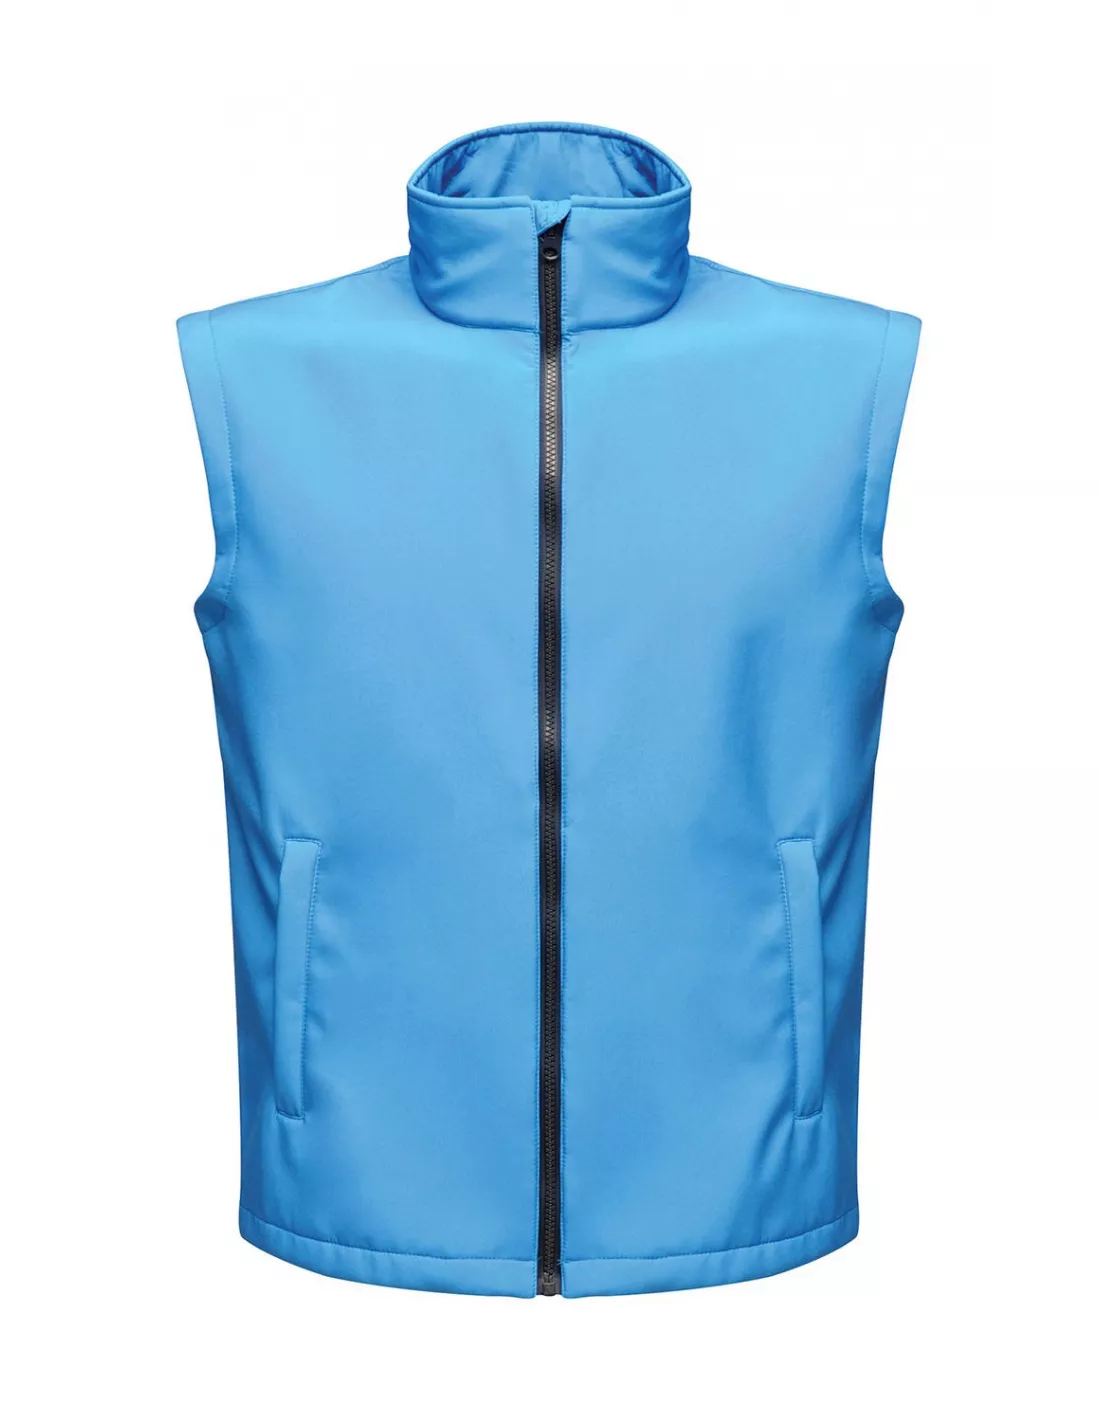 Chaleco Softshell impermeable hombre